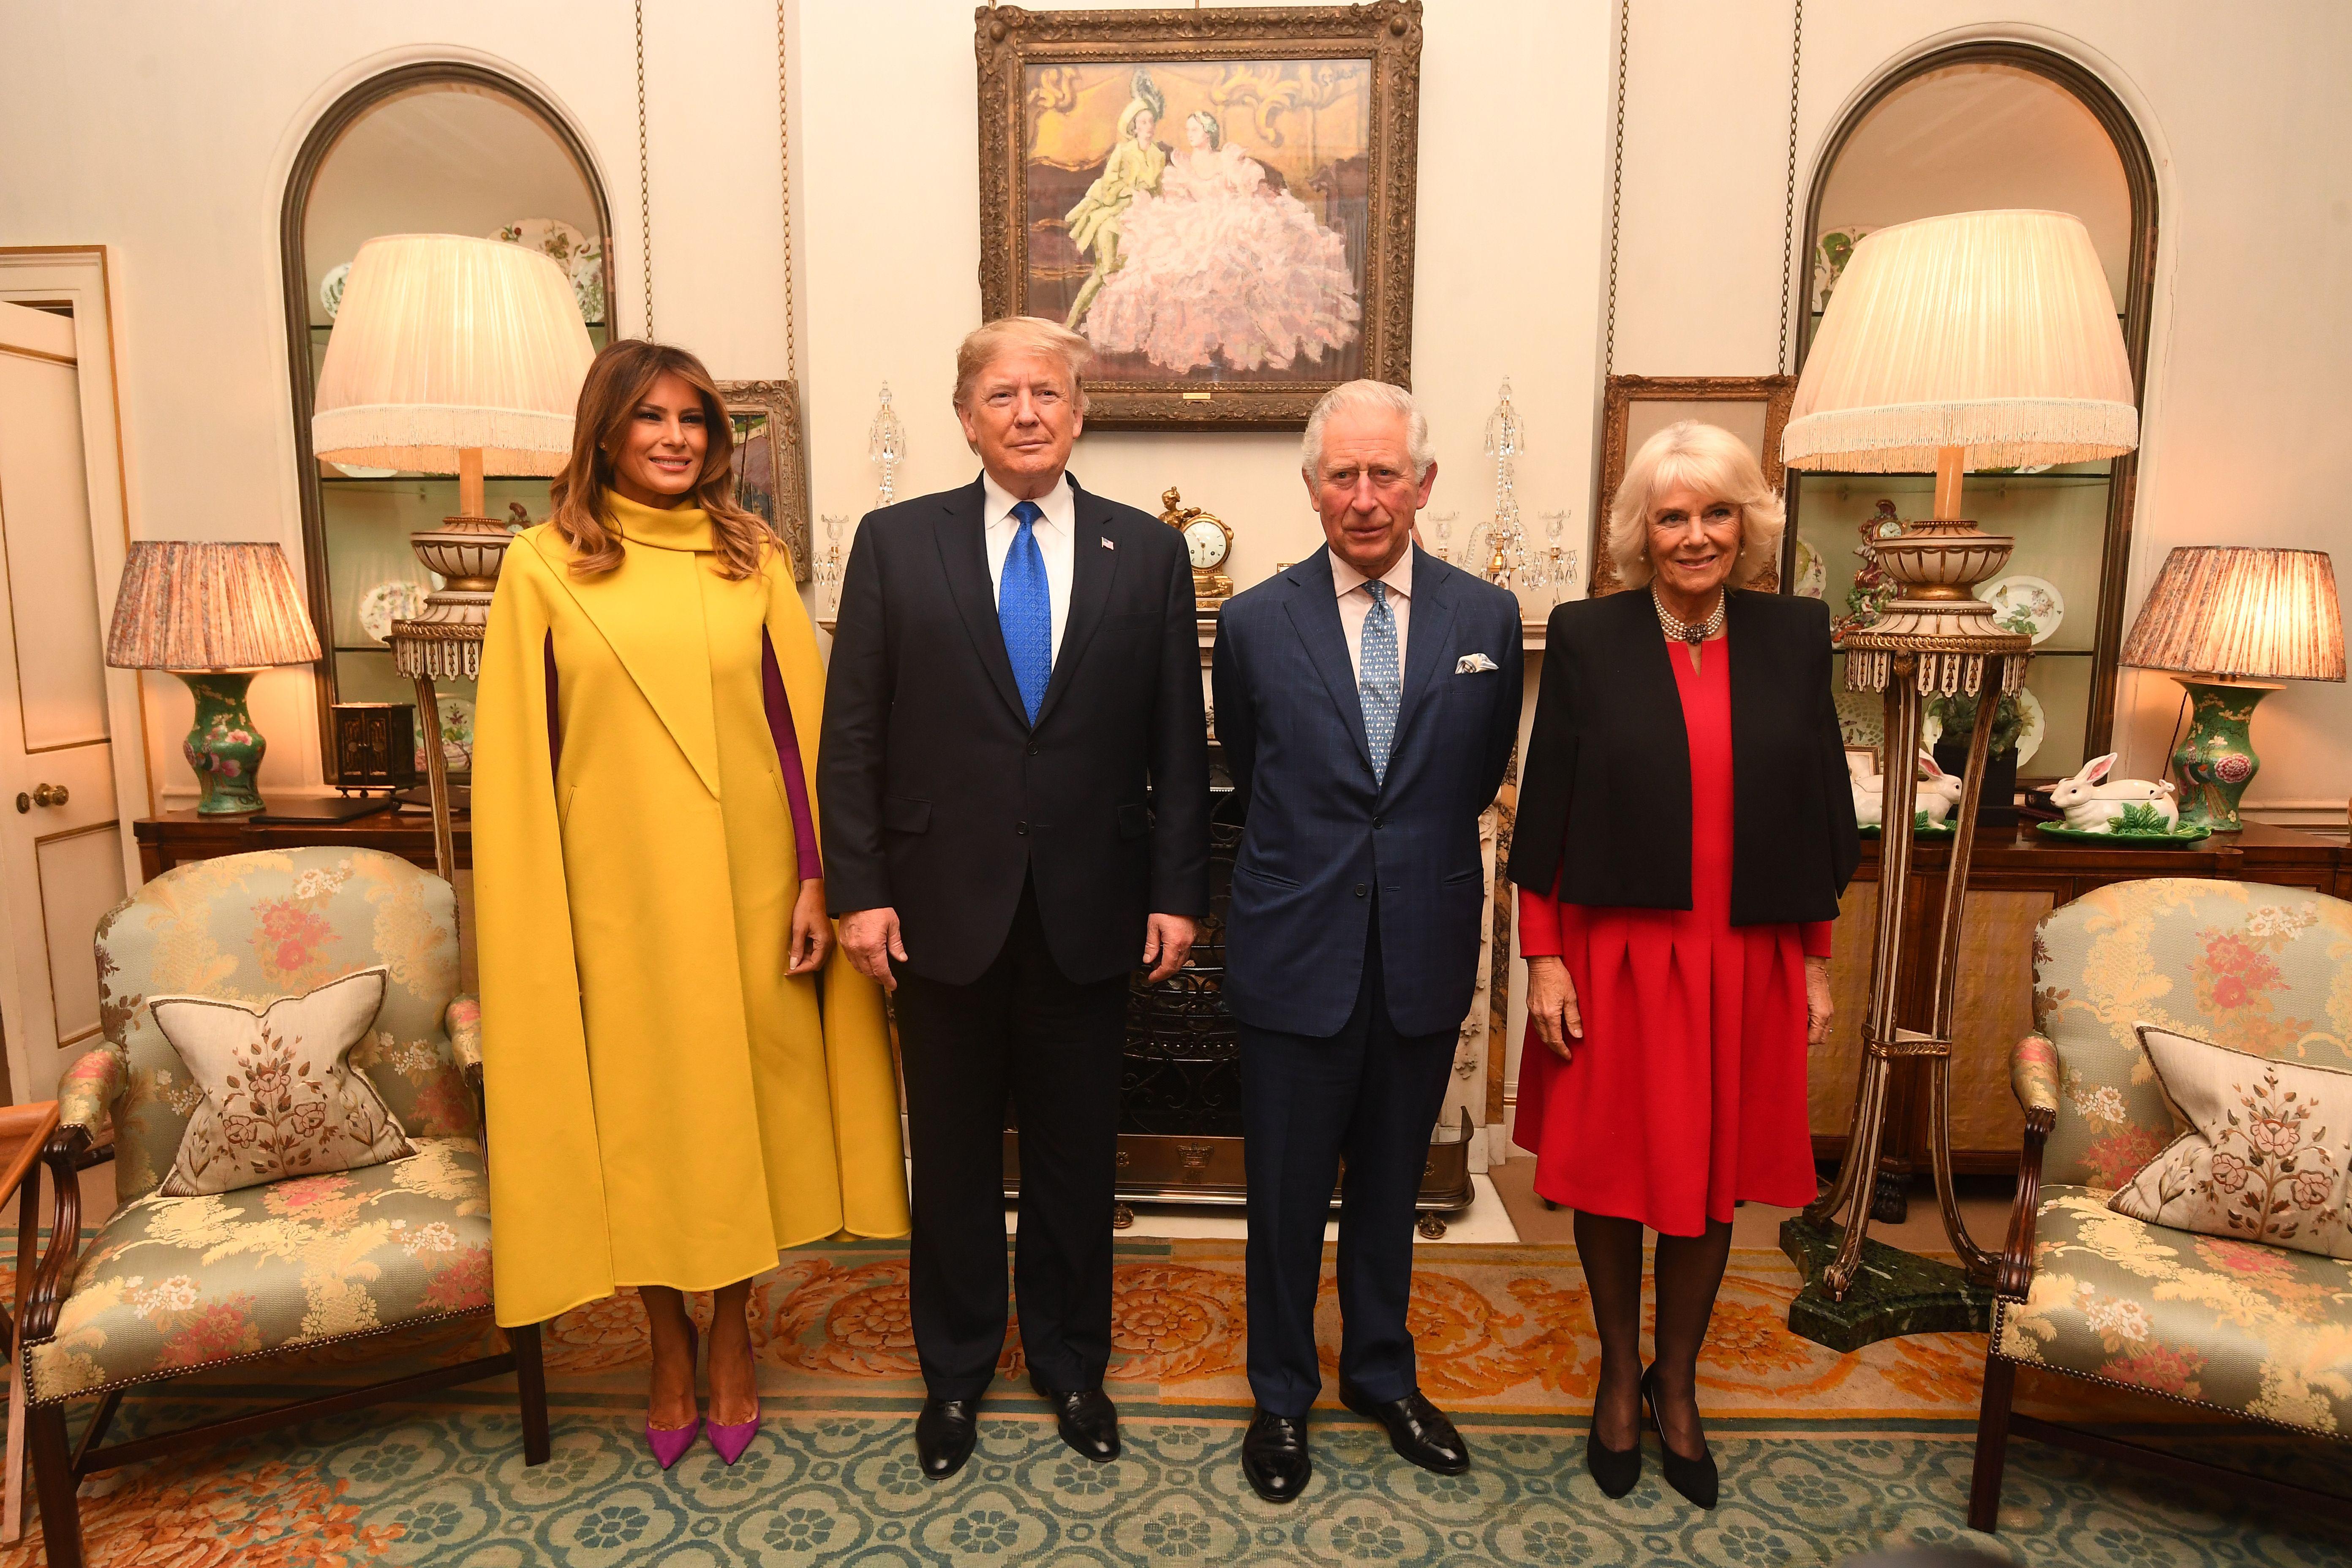 Britain's Prince Charles, Prince of Wales (2nd R) and Britain's Camilla, Duchess of Cornwall (R) meet US President Donald Trump (2nd L) and US First Lady Melania Trump (L) pose for a photograph at Clarence House in central London on December 3, 2019, ahead of the NATO alliance summit. - NATO leaders gather Tuesday for a summit to mark the alliance's 70th anniversary but with leaders feuding and name-calling over money and strategy, the mood is far from festive. (Photo by Victoria Jones / POOL / AFP) (Photo by VICTORIA JONES/POOL/AFP via Getty Images)